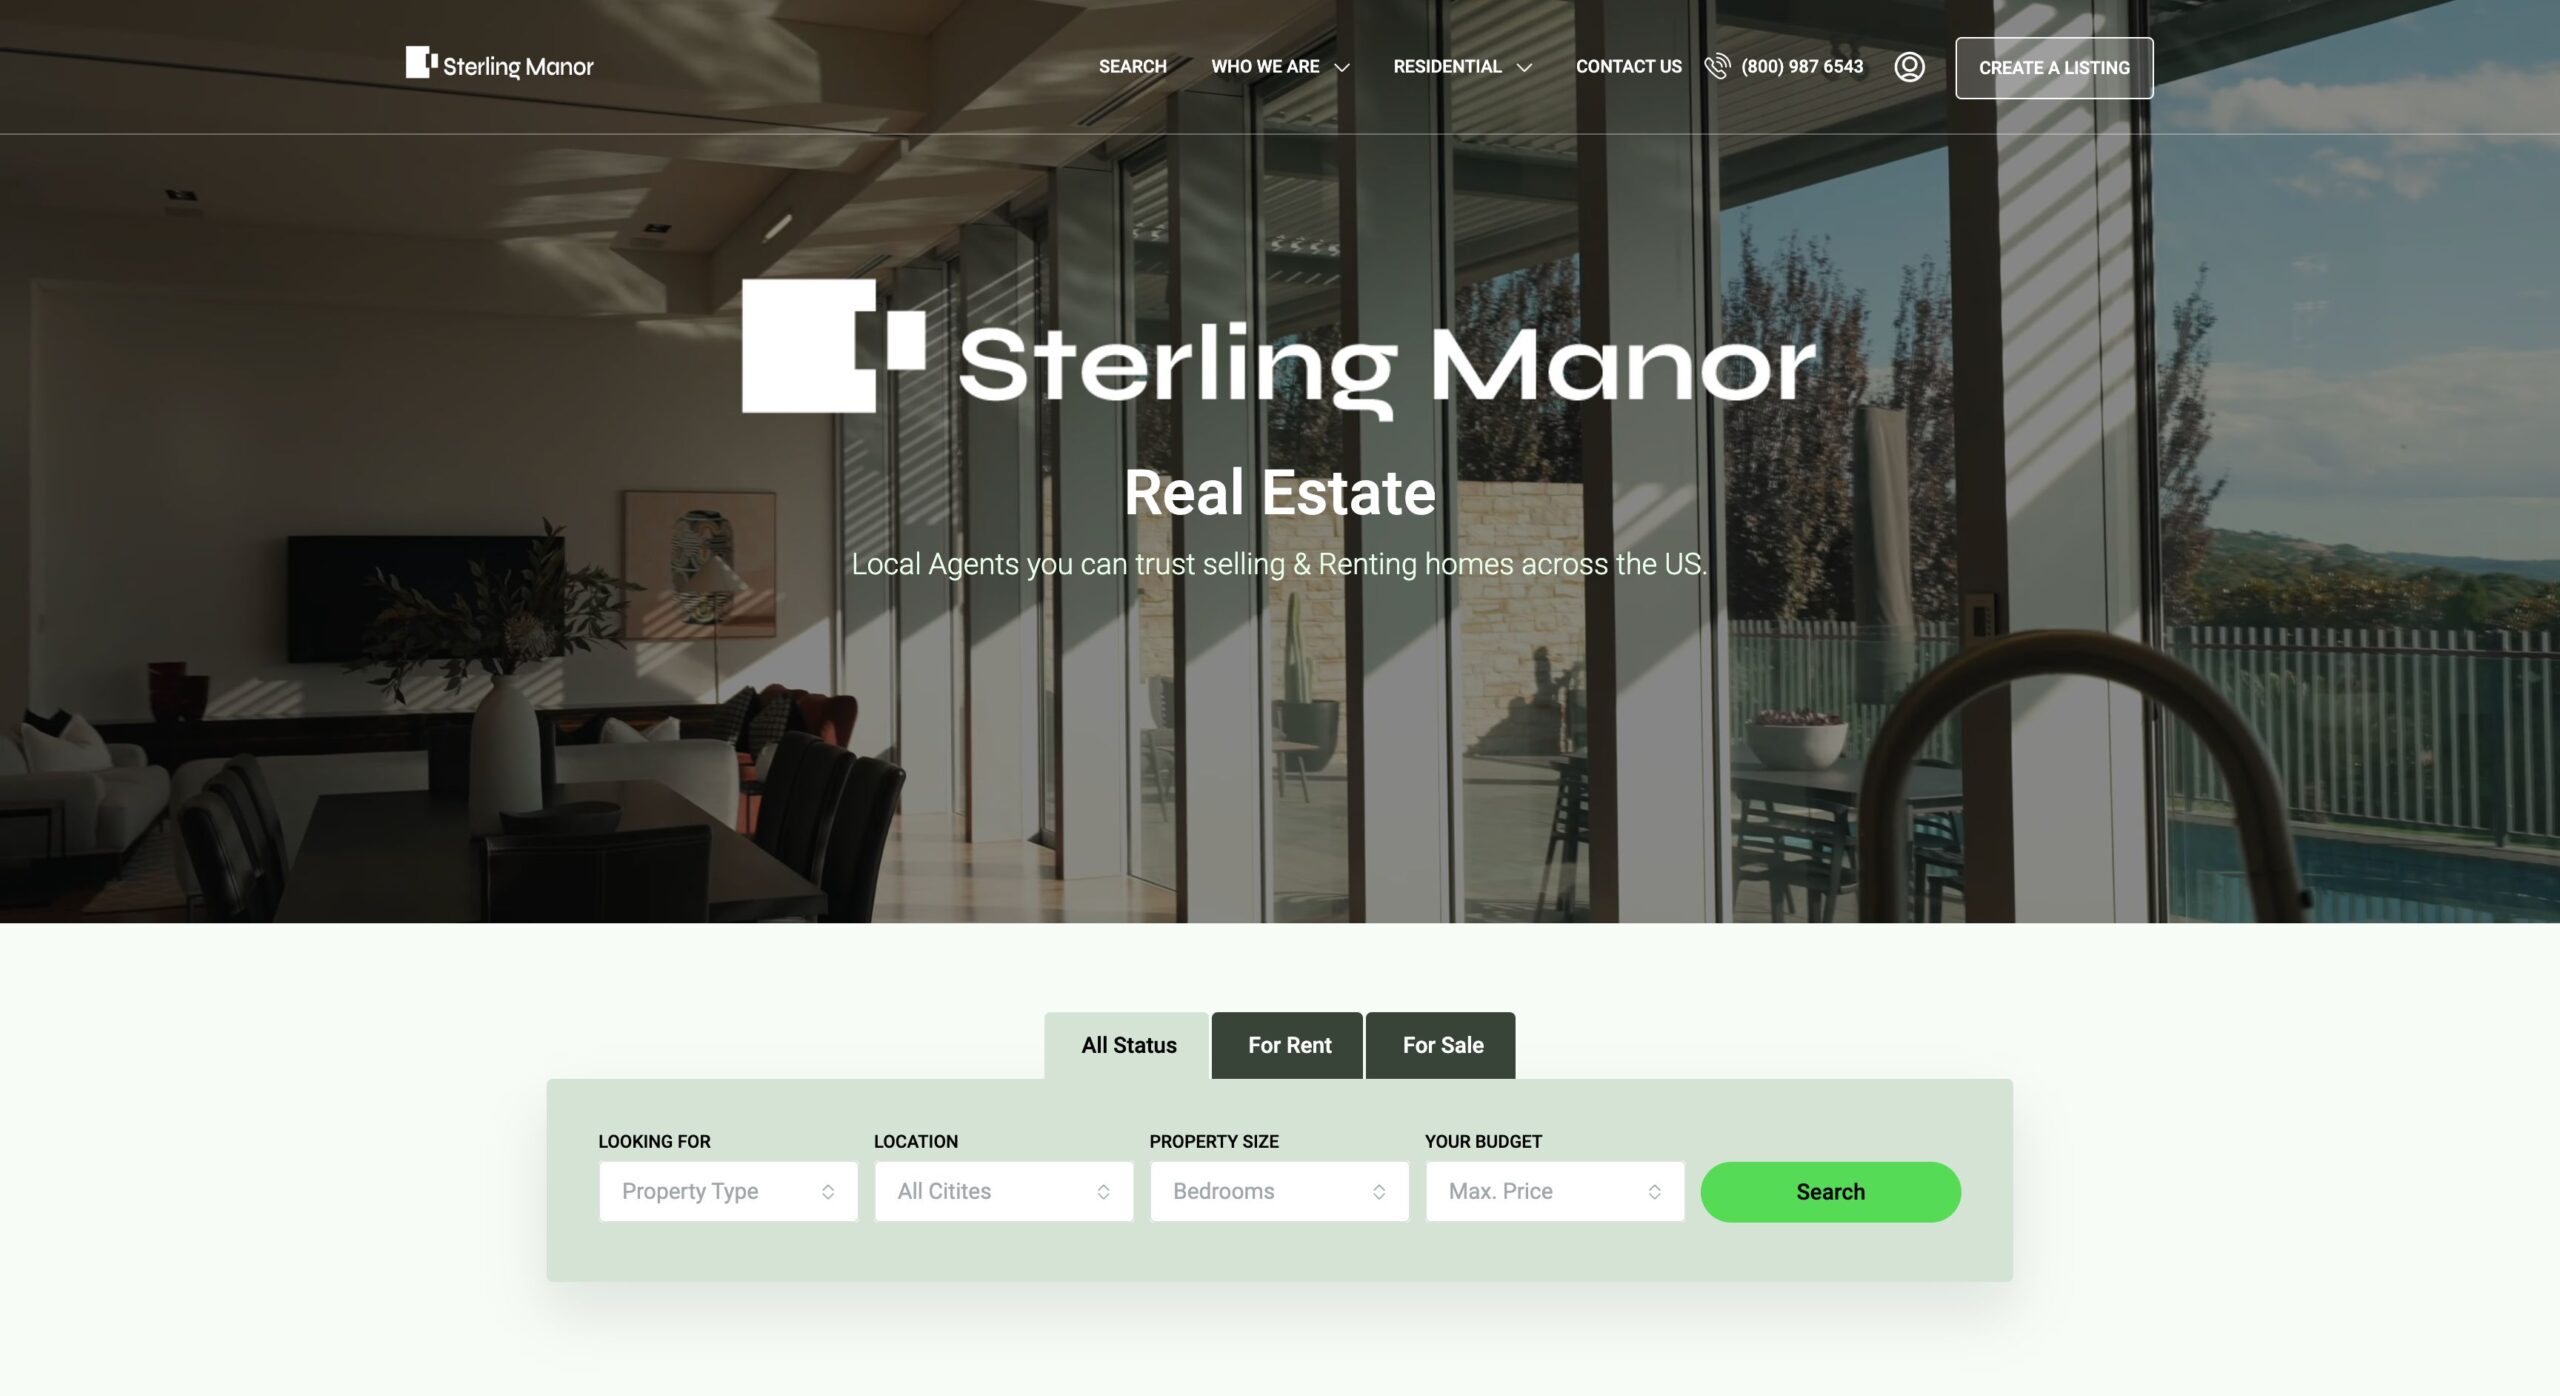 Real estate portfolio website homepage featuring a search panel over an image of a stylish interior with a view.